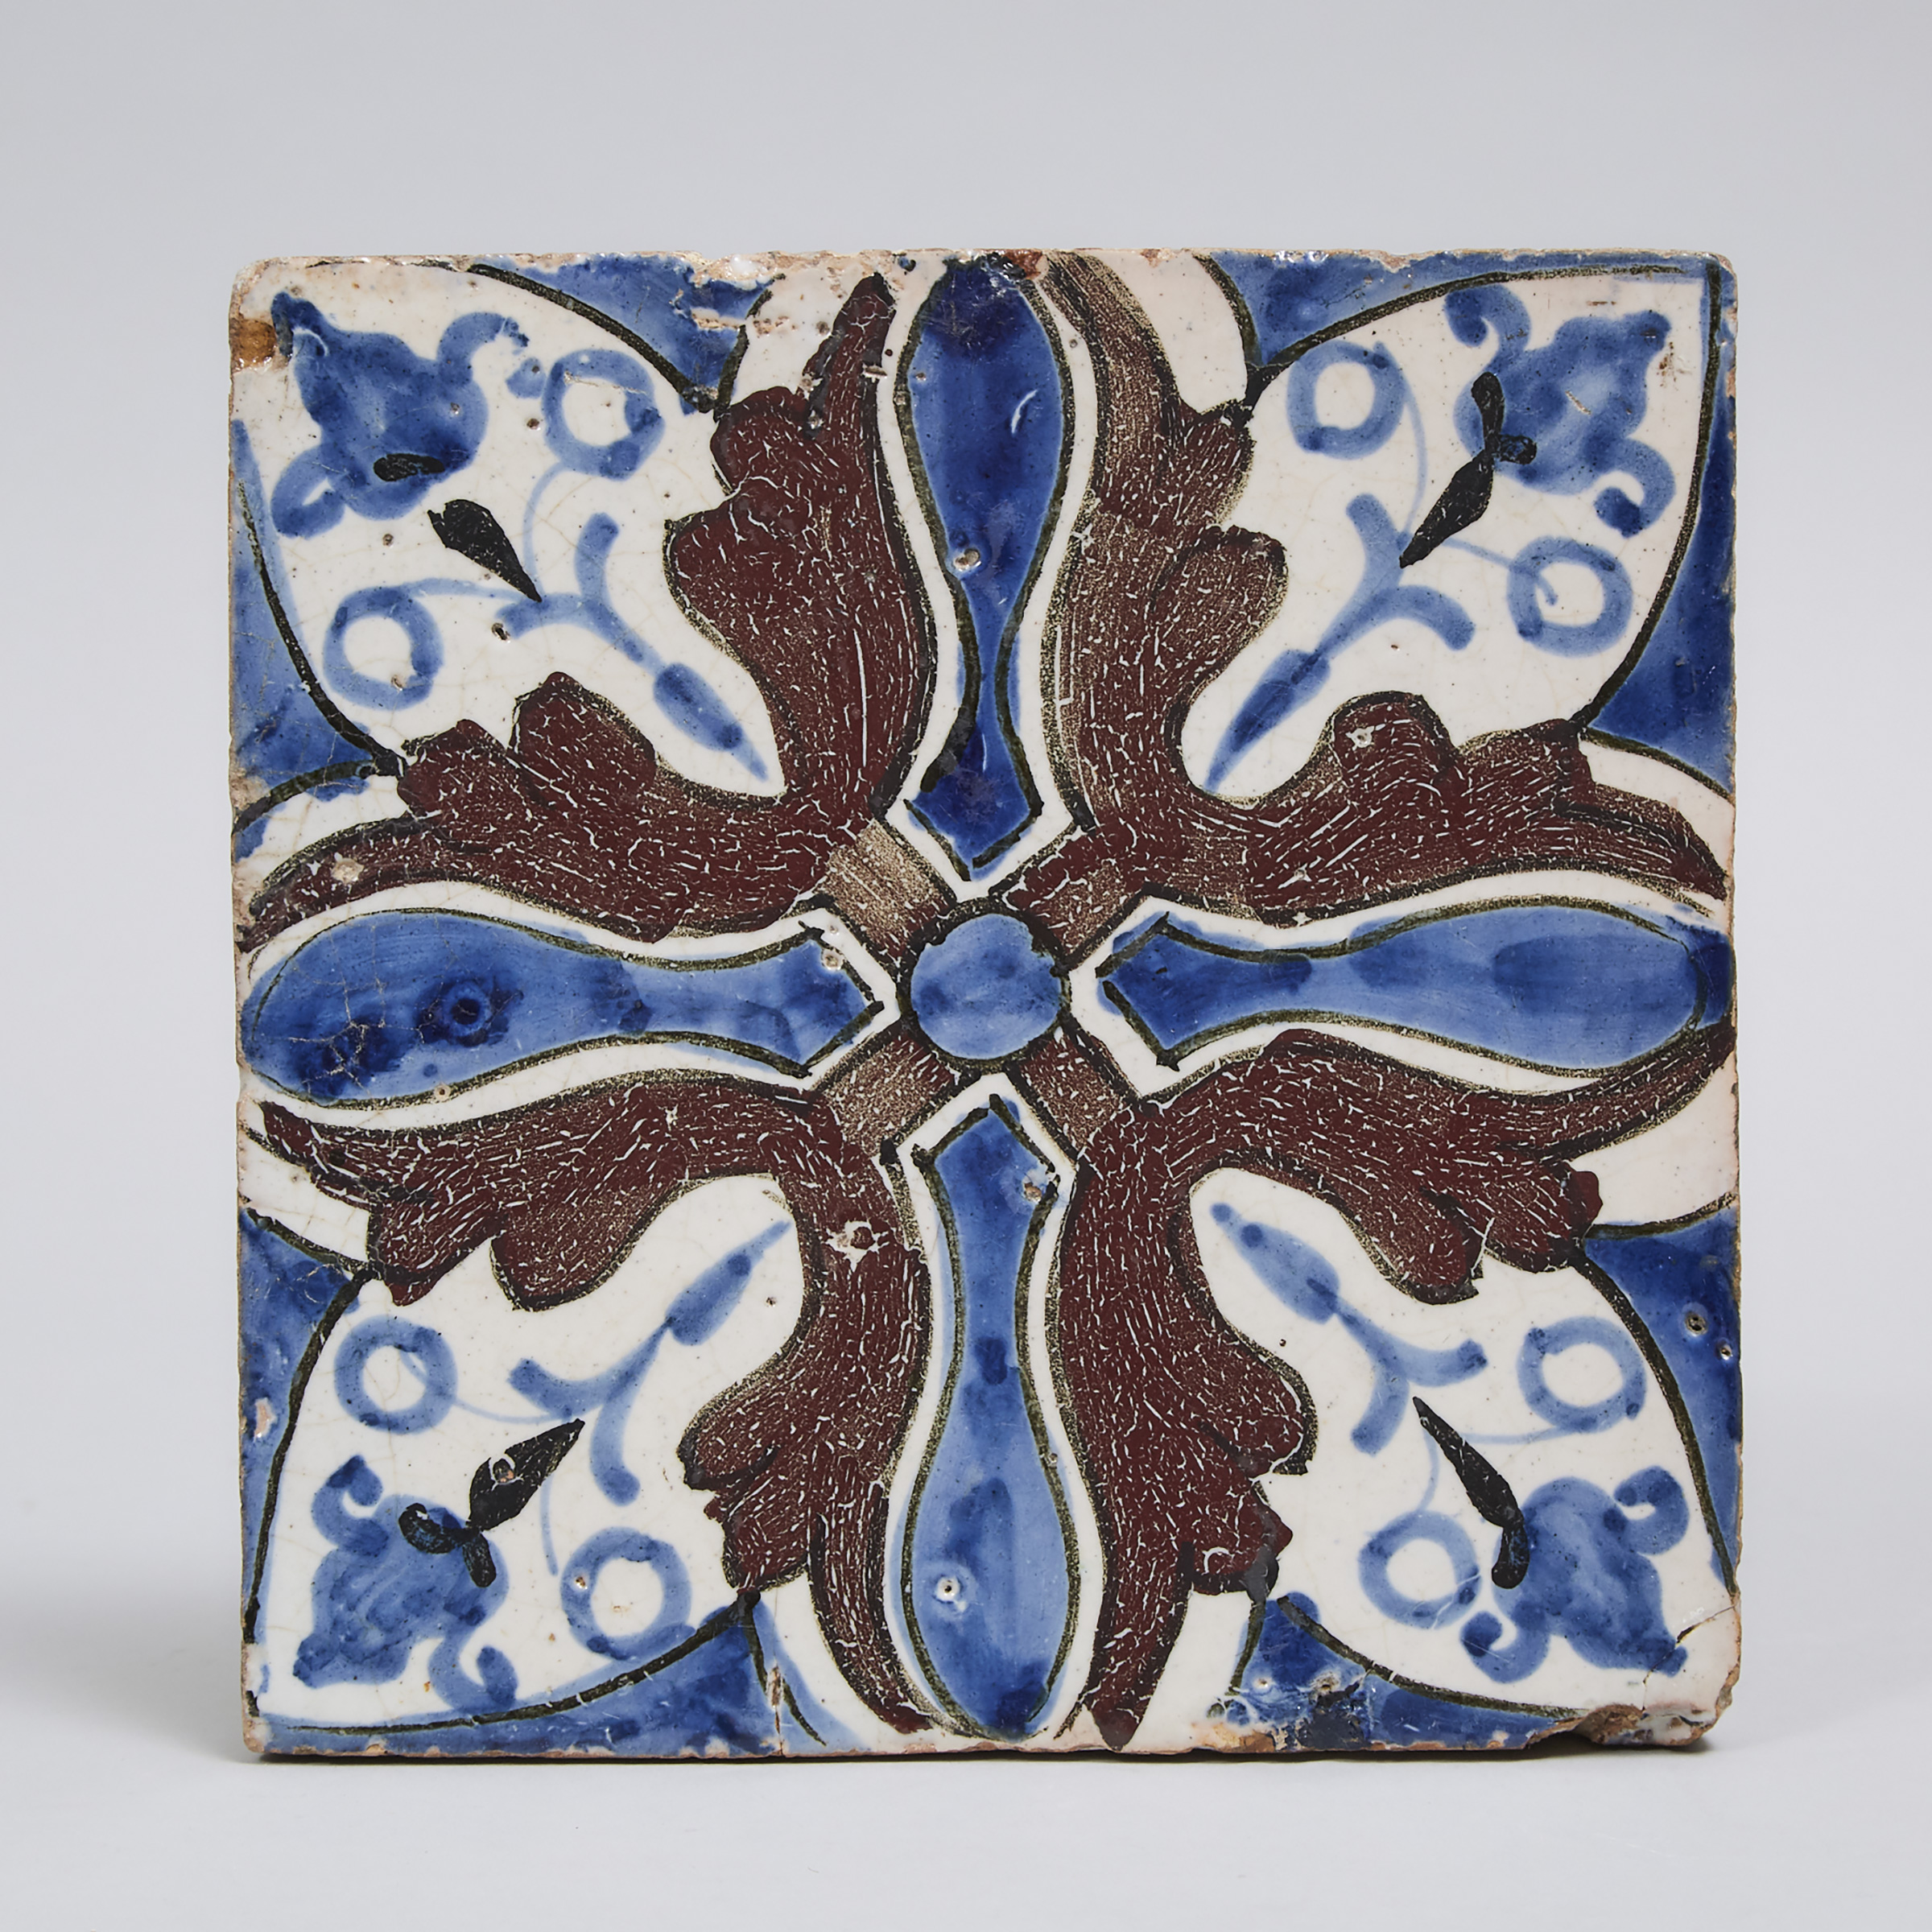 Persian Blue and Brown Flowered Pottery Tile, Syria, 18th/19th century